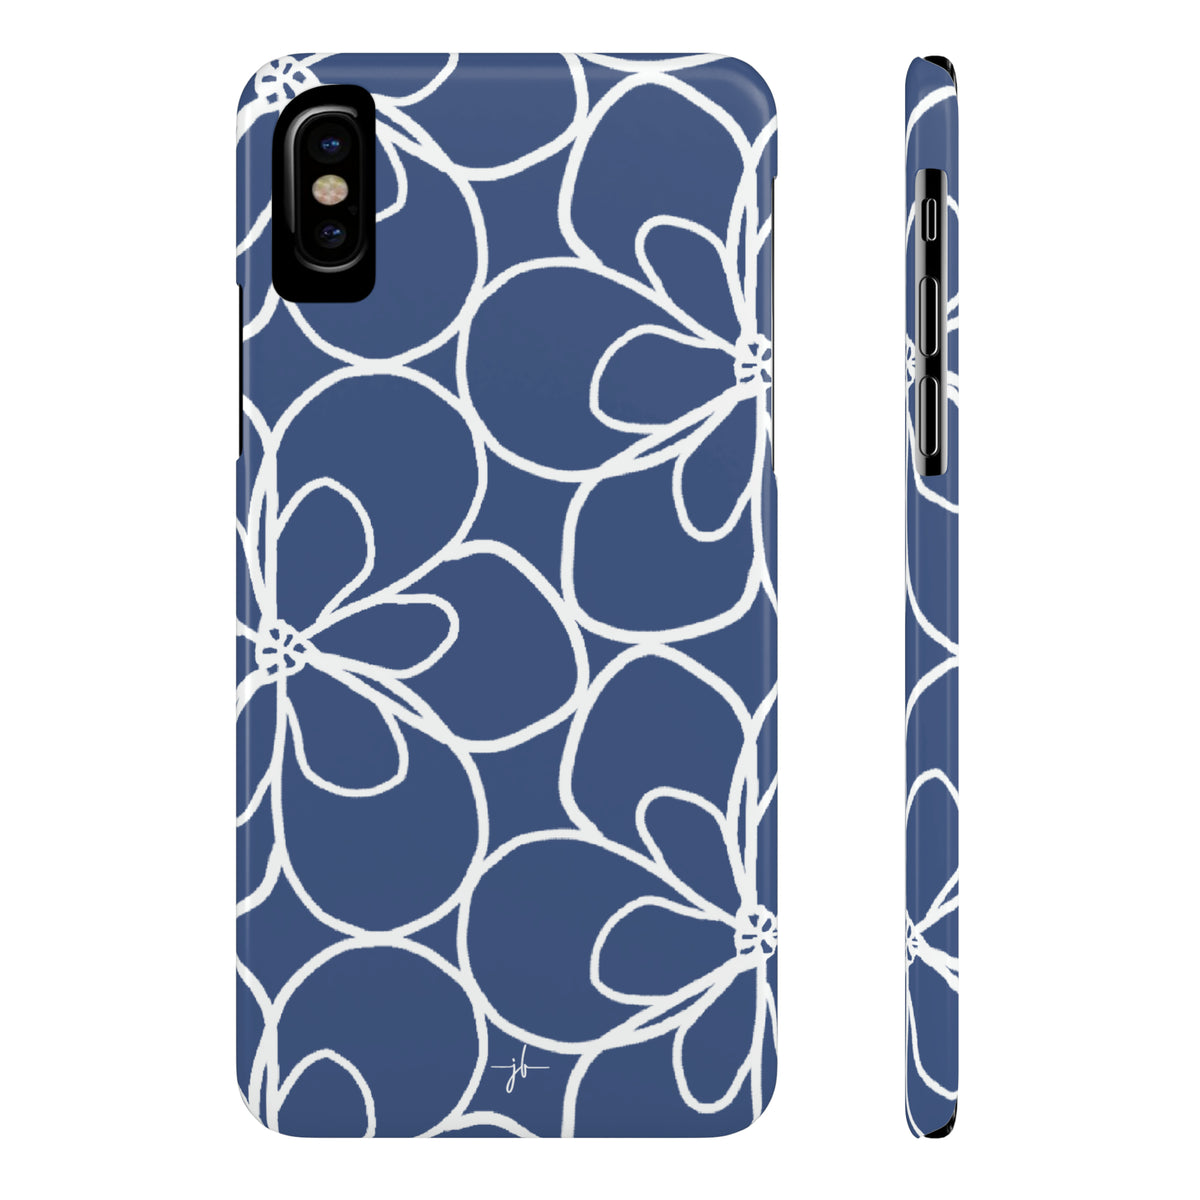 iPhone case from front and side with blue background and white floral pattern